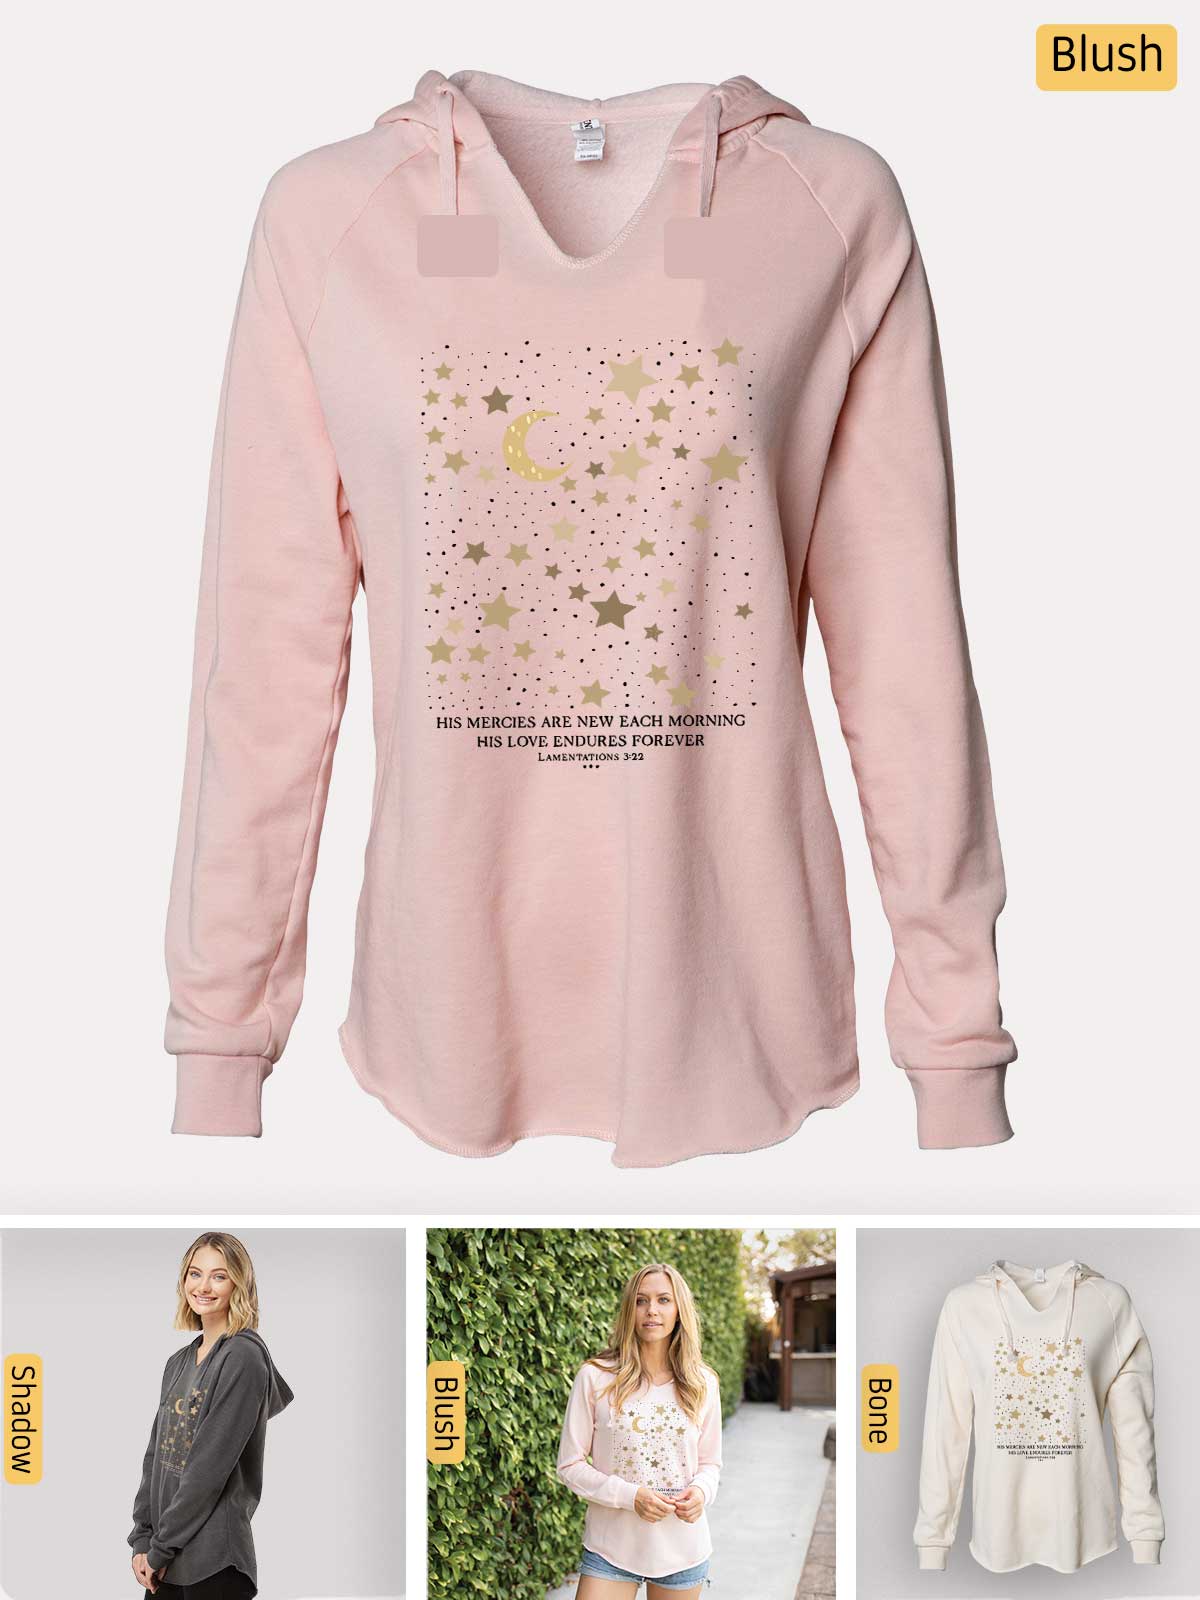 a women's pink hoodie with gold stars on it